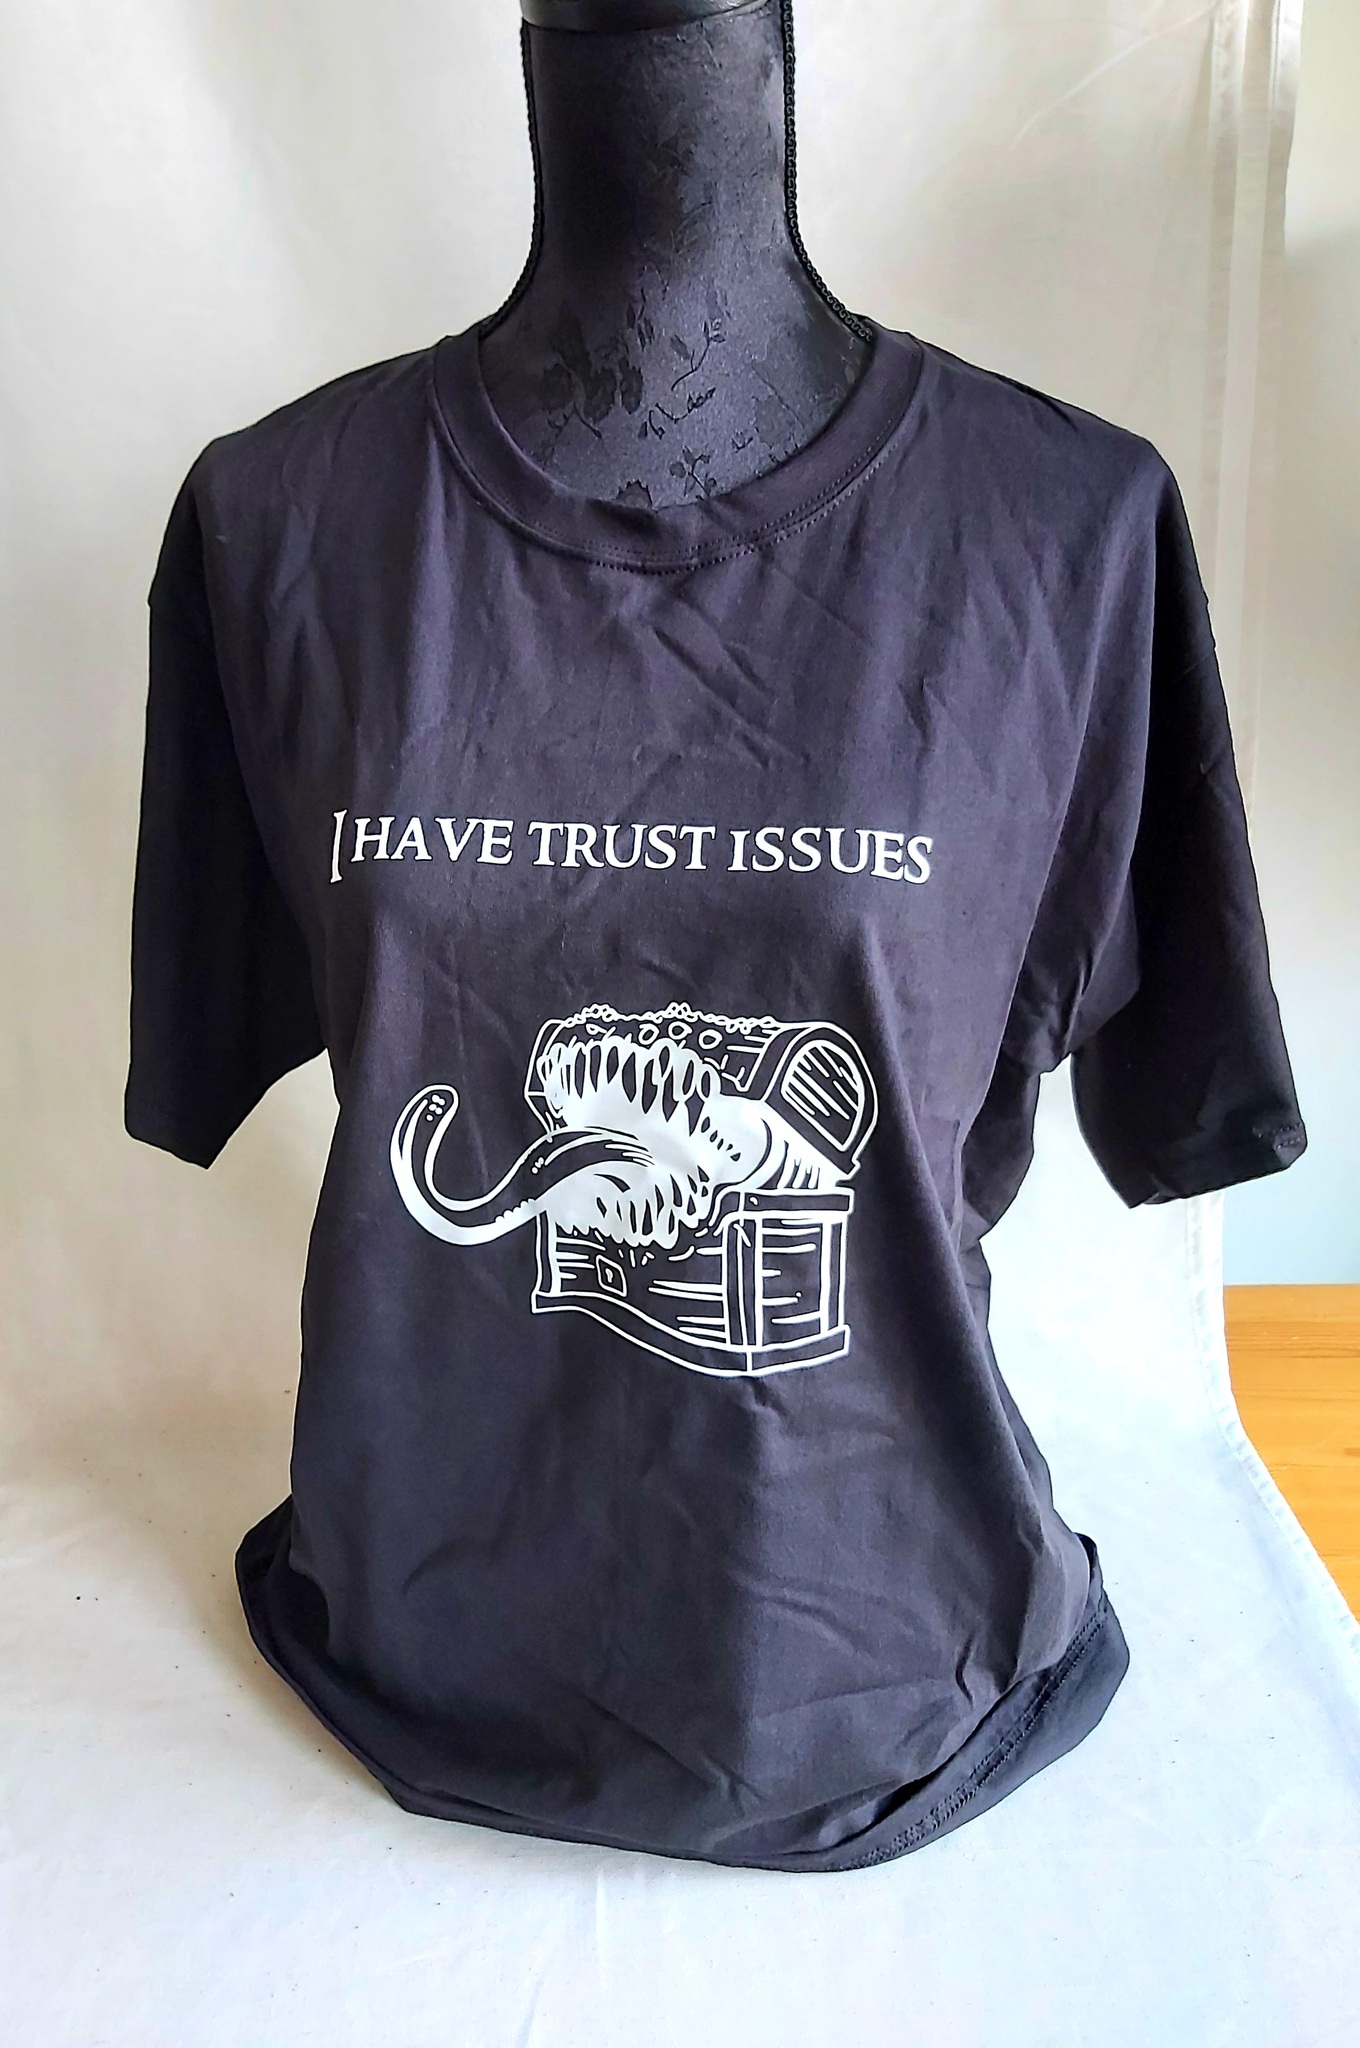 RPG t-shirt - Mimic, I have trust issues